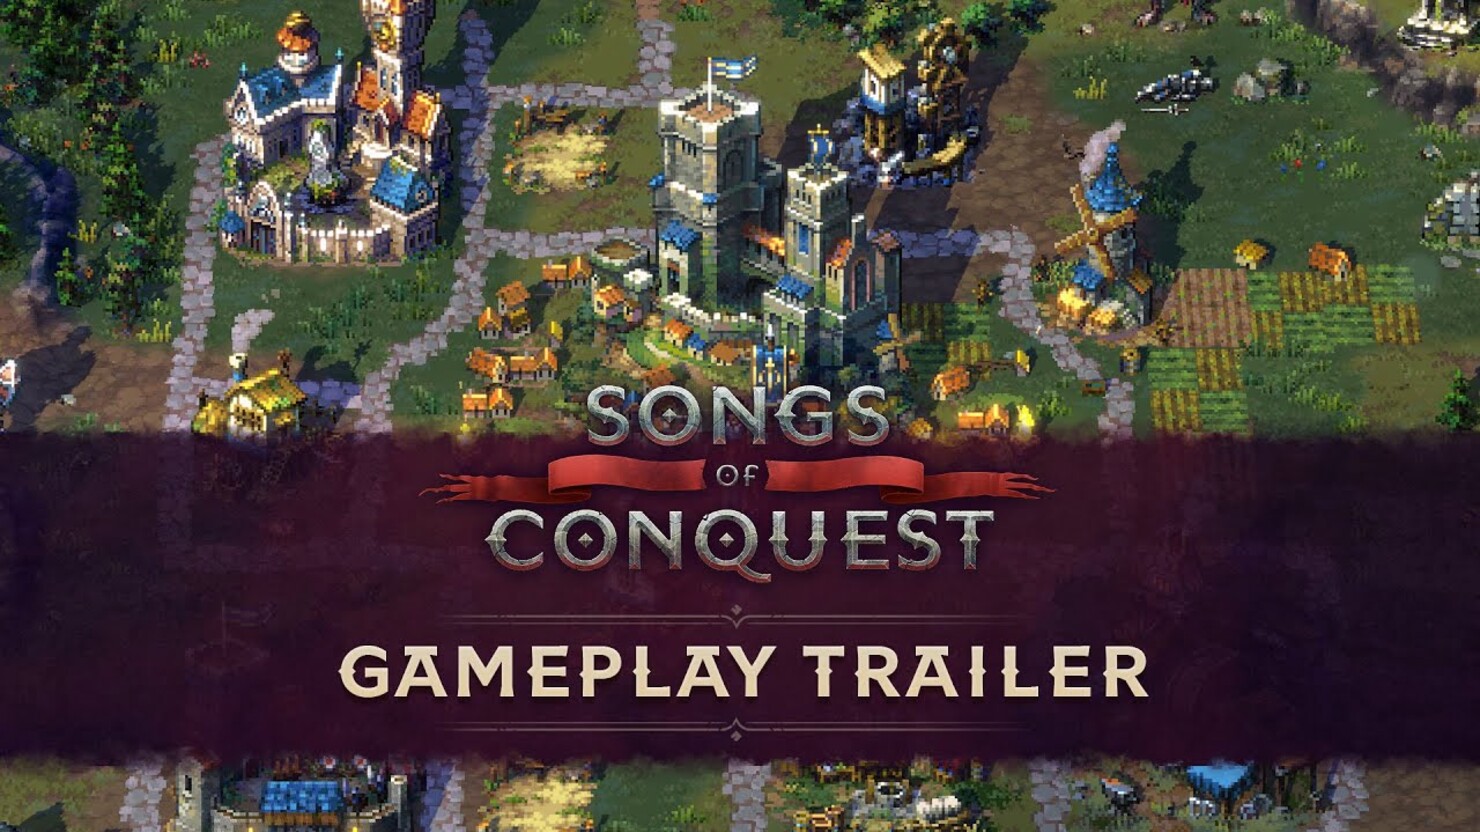 Songs of Conquest геймплей. Songs of Conquest стратегия. Замки в Song of Conquest. Heroes III - Song of Conquest. Собранное королевство